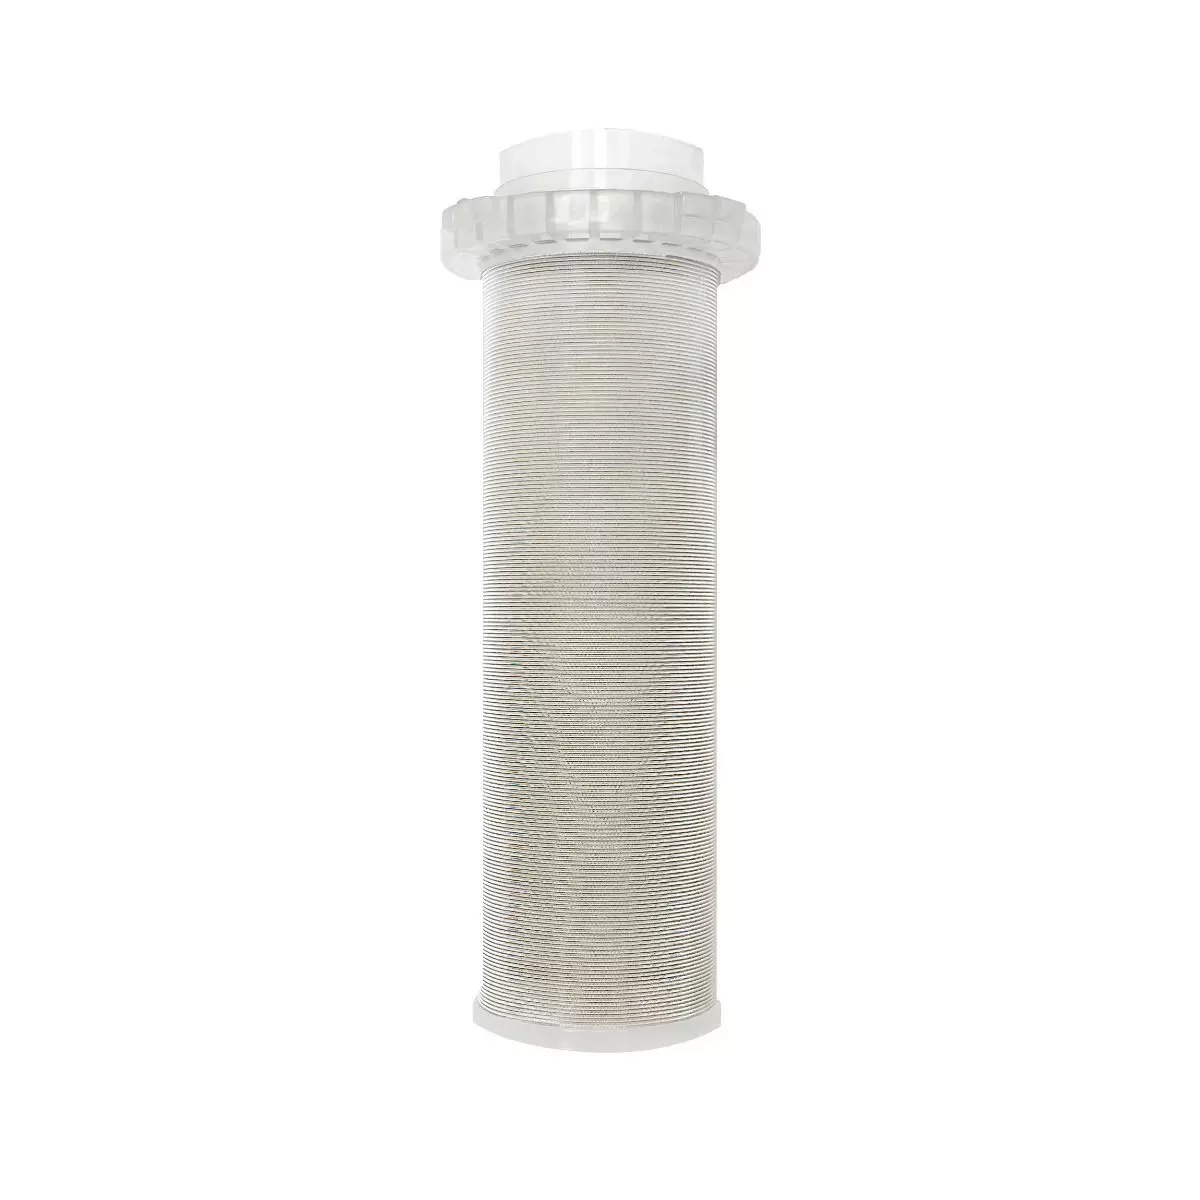 Replacement Cartridge For Aquaboon Spin Down Sediment Water Pre Filter, 900 Micron